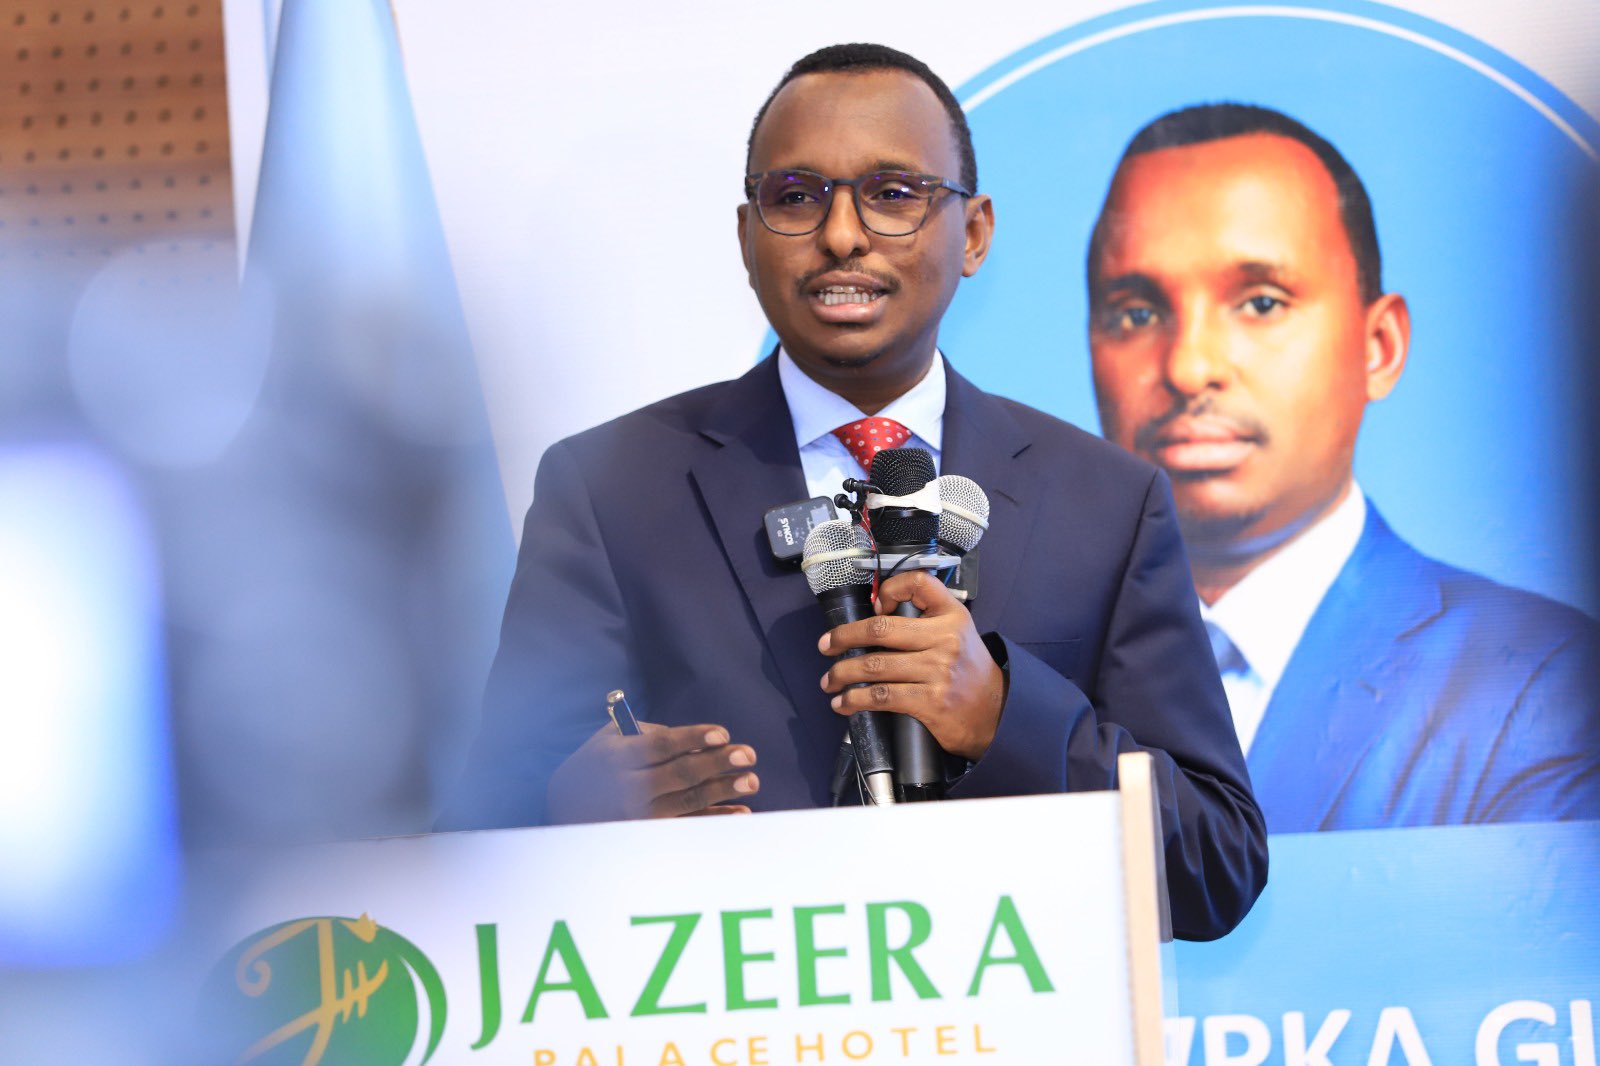 The Auditor General of the Republic of Somalia, H.E. Ahmed Issa Gutale, joined press representatives in a welcoming ceremony in Mogadishu to congratulate him on his appointment.